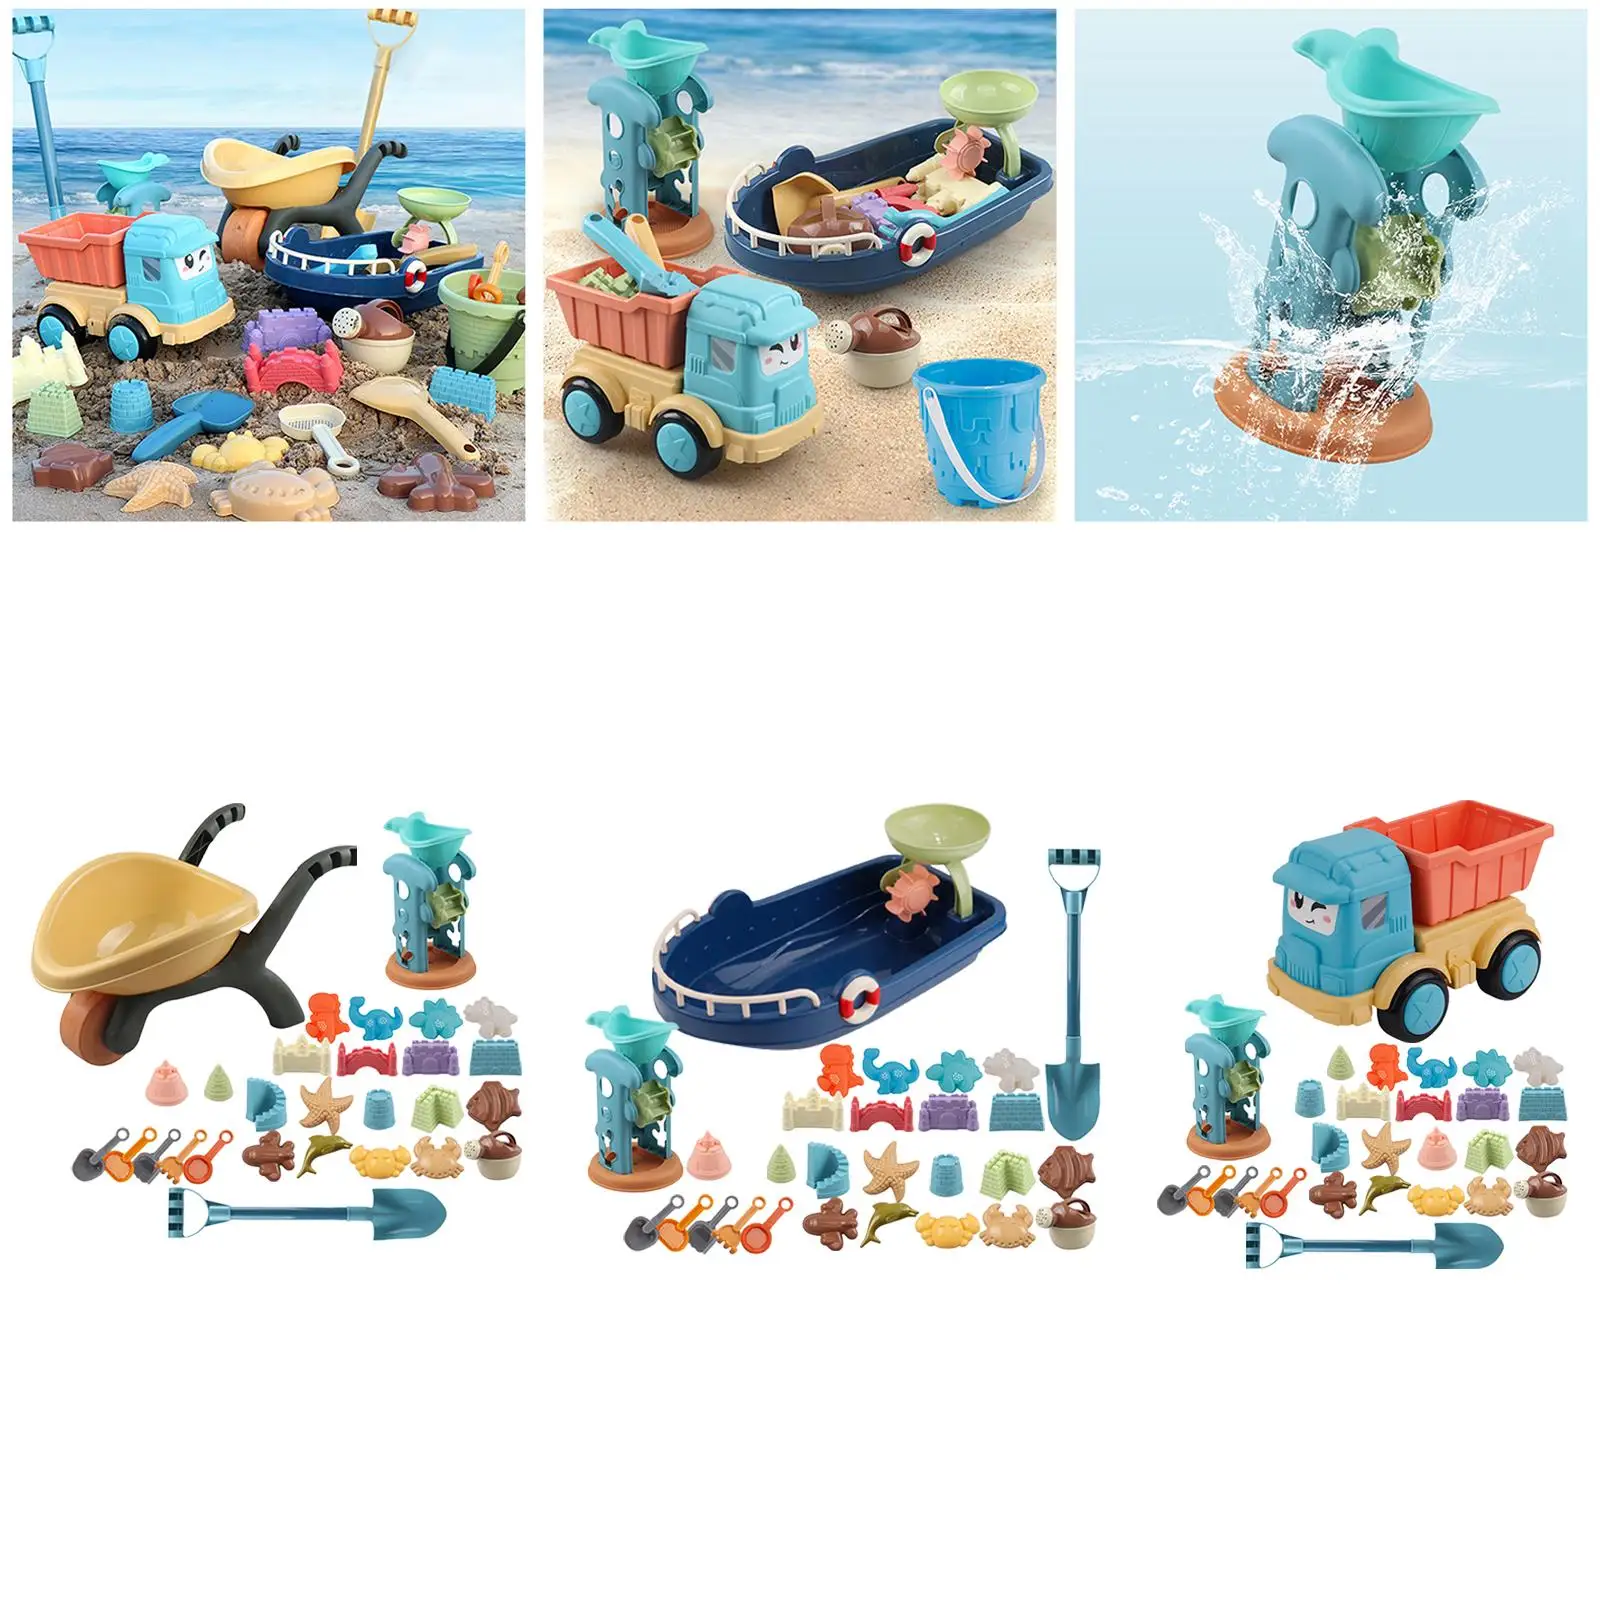 28 Pieces Sand Beach Toys Kids Playset for Games Age 2-6 Birthday Gifts